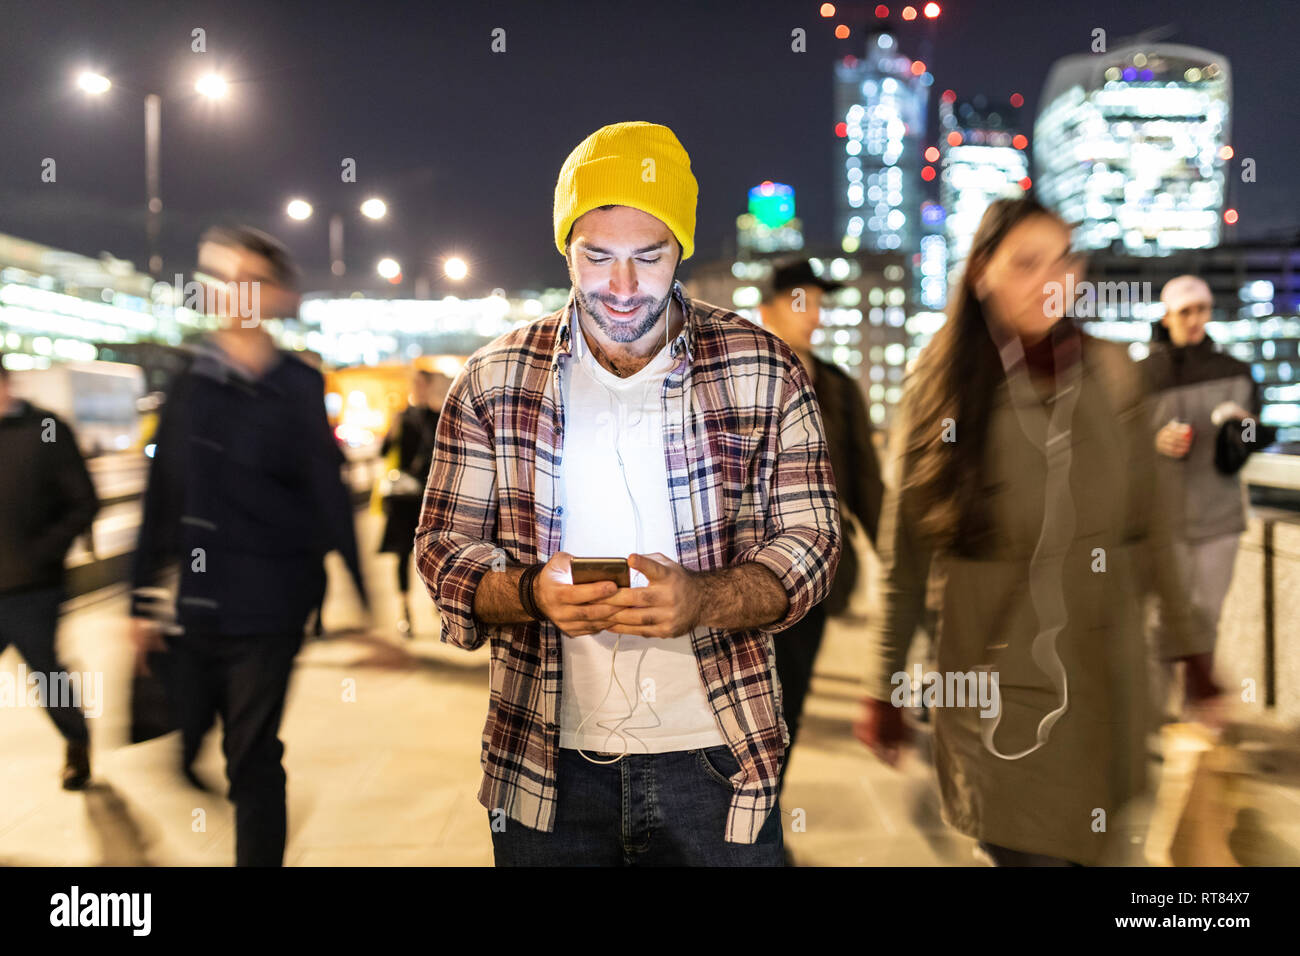 UK, London, smiling man looking at his phone by night with blurred people passing nearby Stock Photo